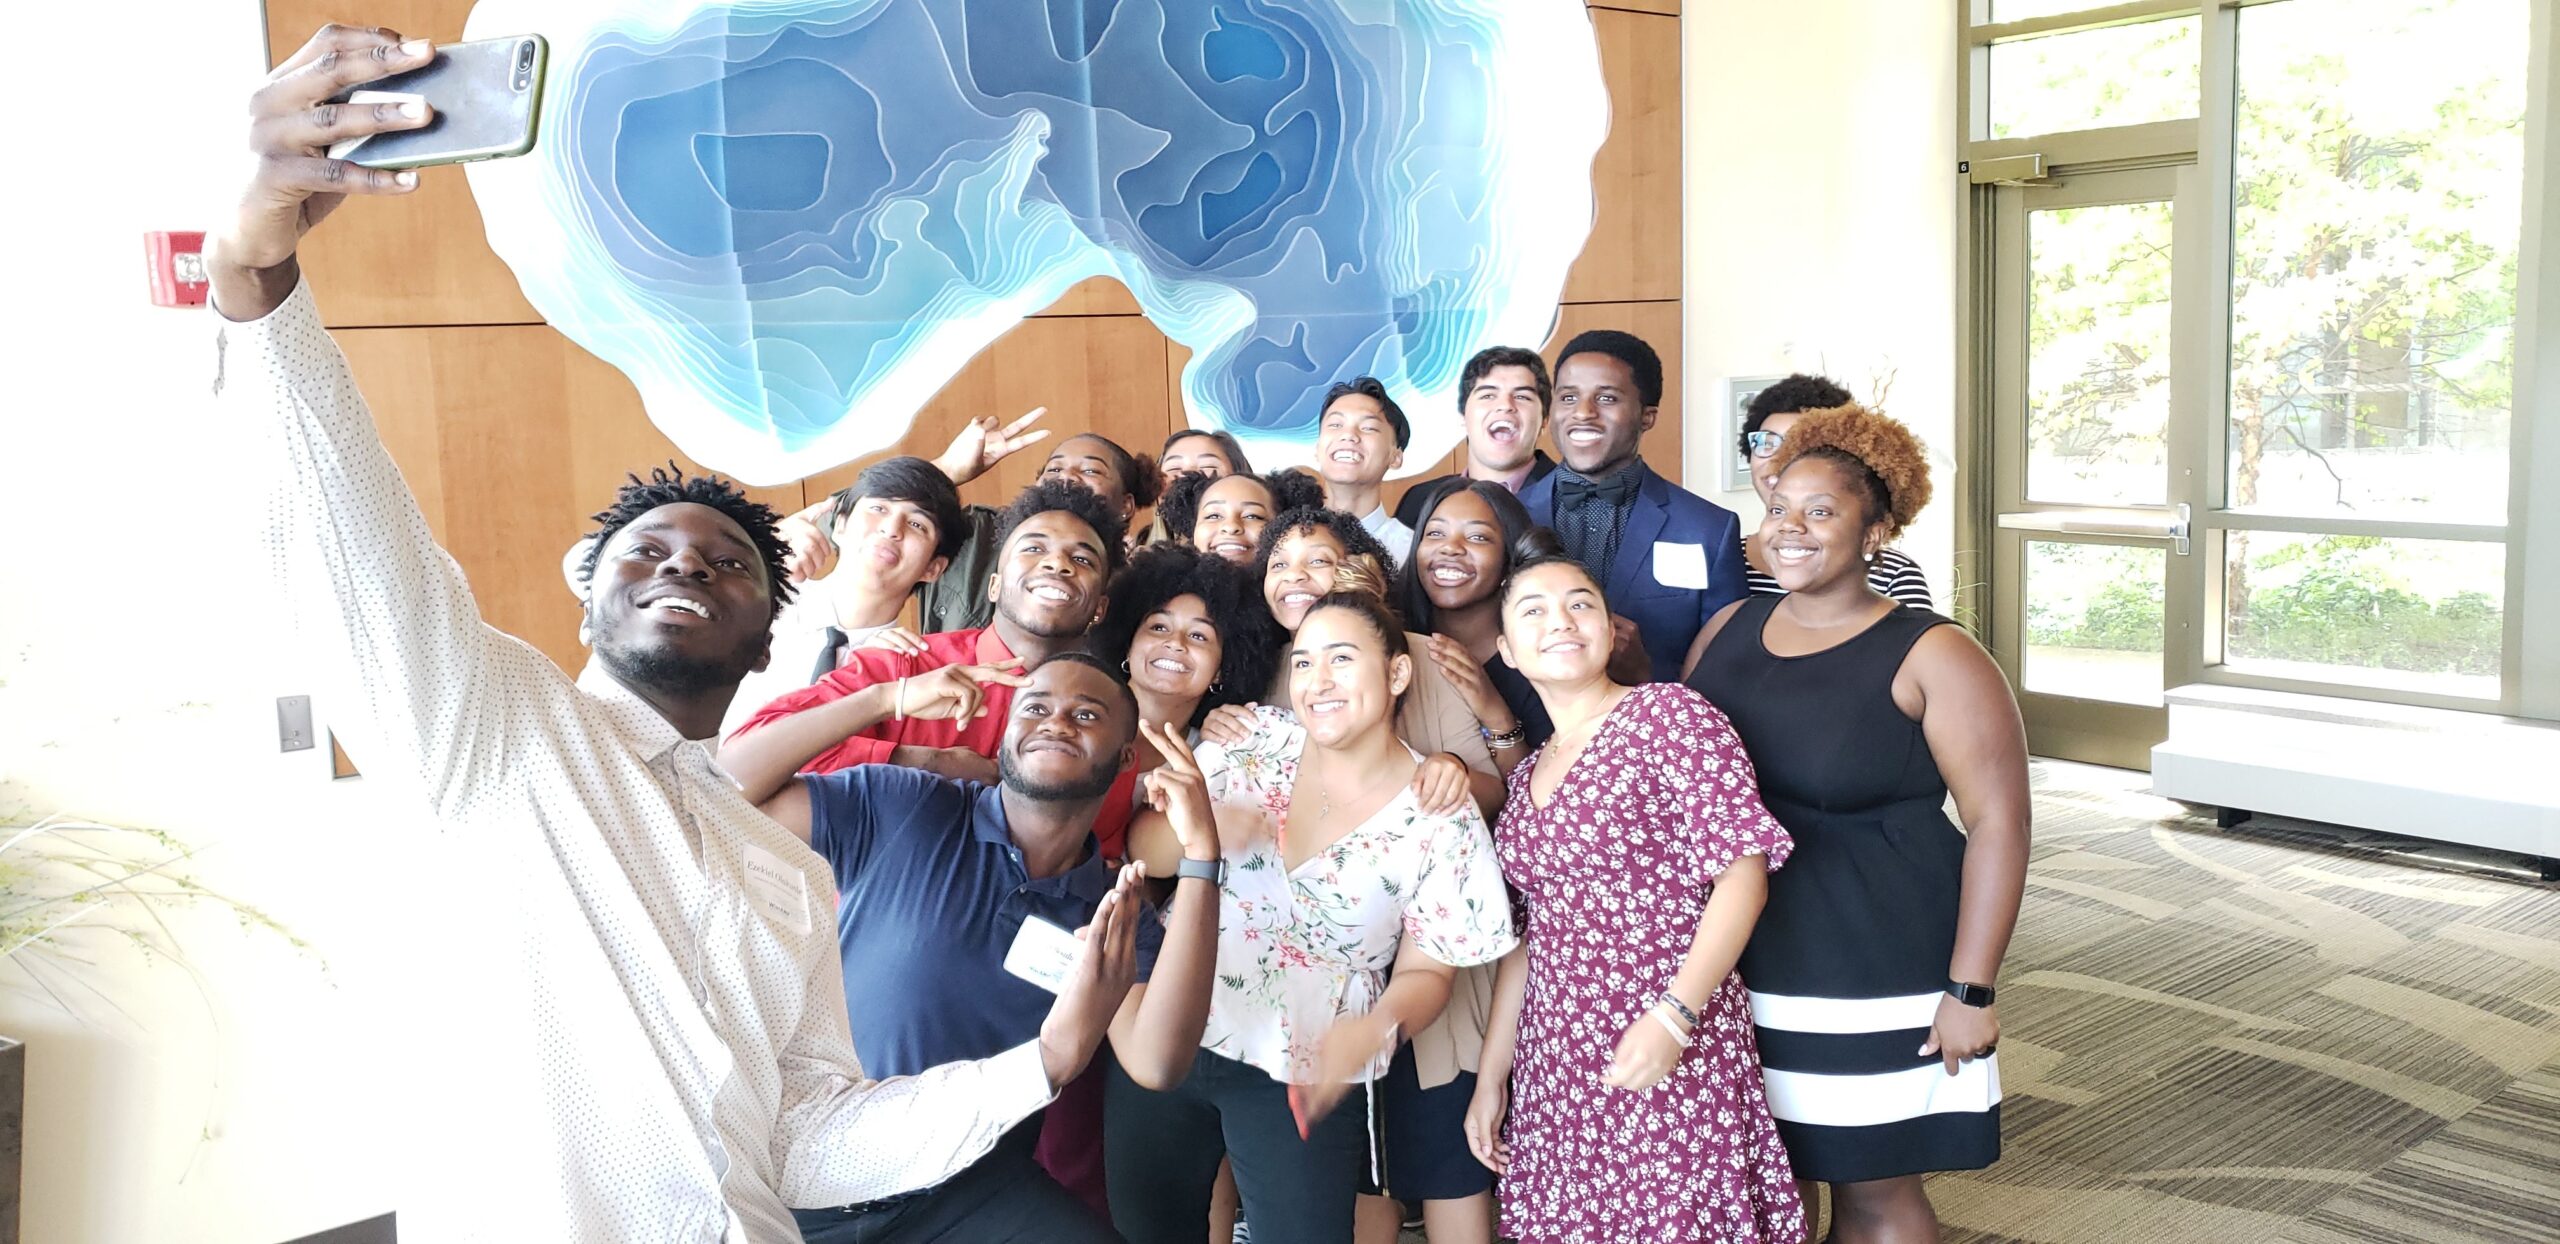 Photo of WiscAMP students from Beloit College, UW-Eau Claire, UW-La Crosse, UW-Madison, UW-Milwaukee, UW-River Falls, and UW-Whitewater capturing their smiles on the last day of the 2019 Excel Summer Program. Photograph by Denise Thomas.